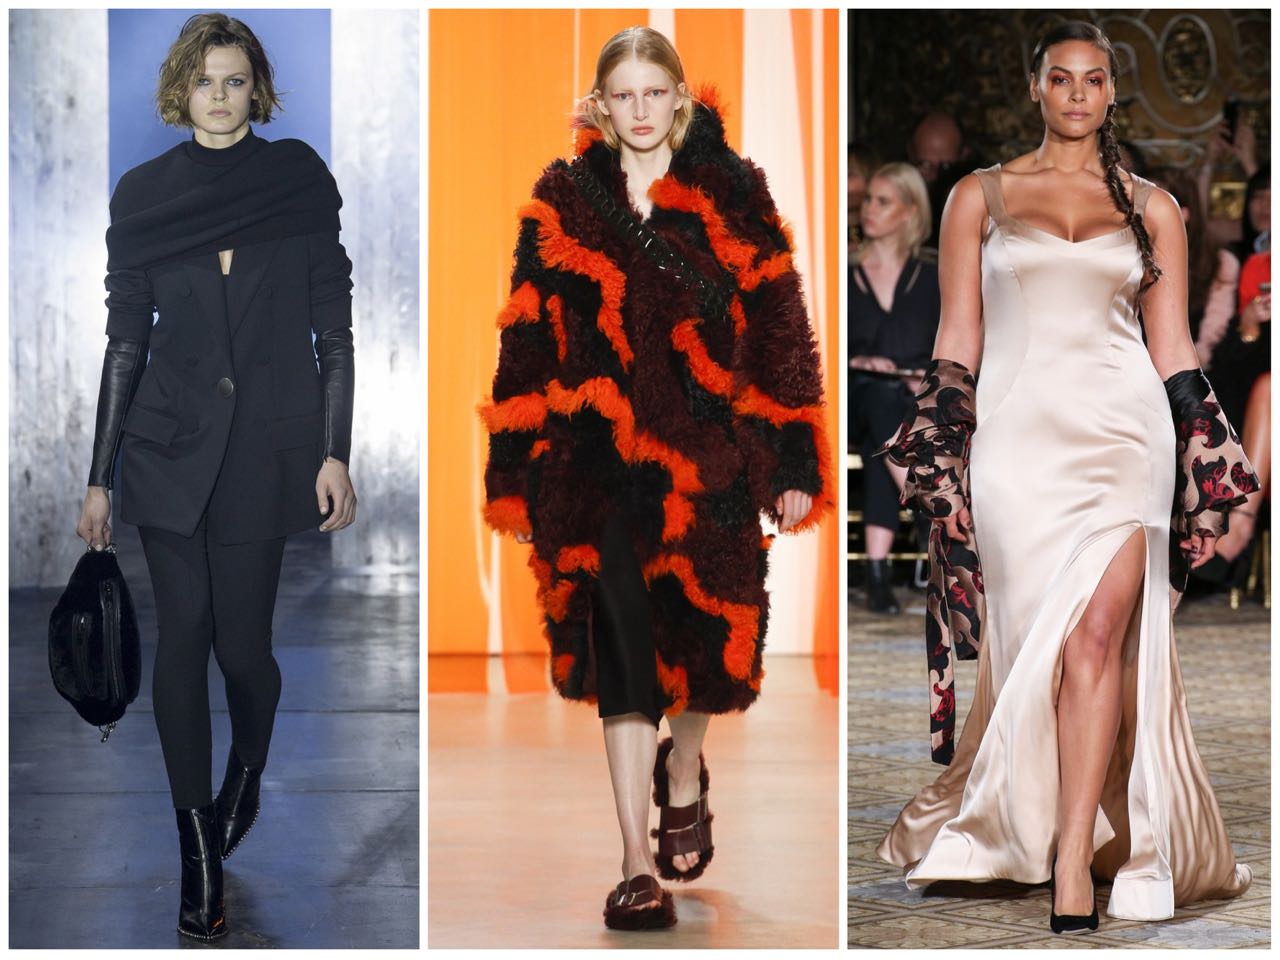 Trend Spotting From Day 3 Of NYFW AW17